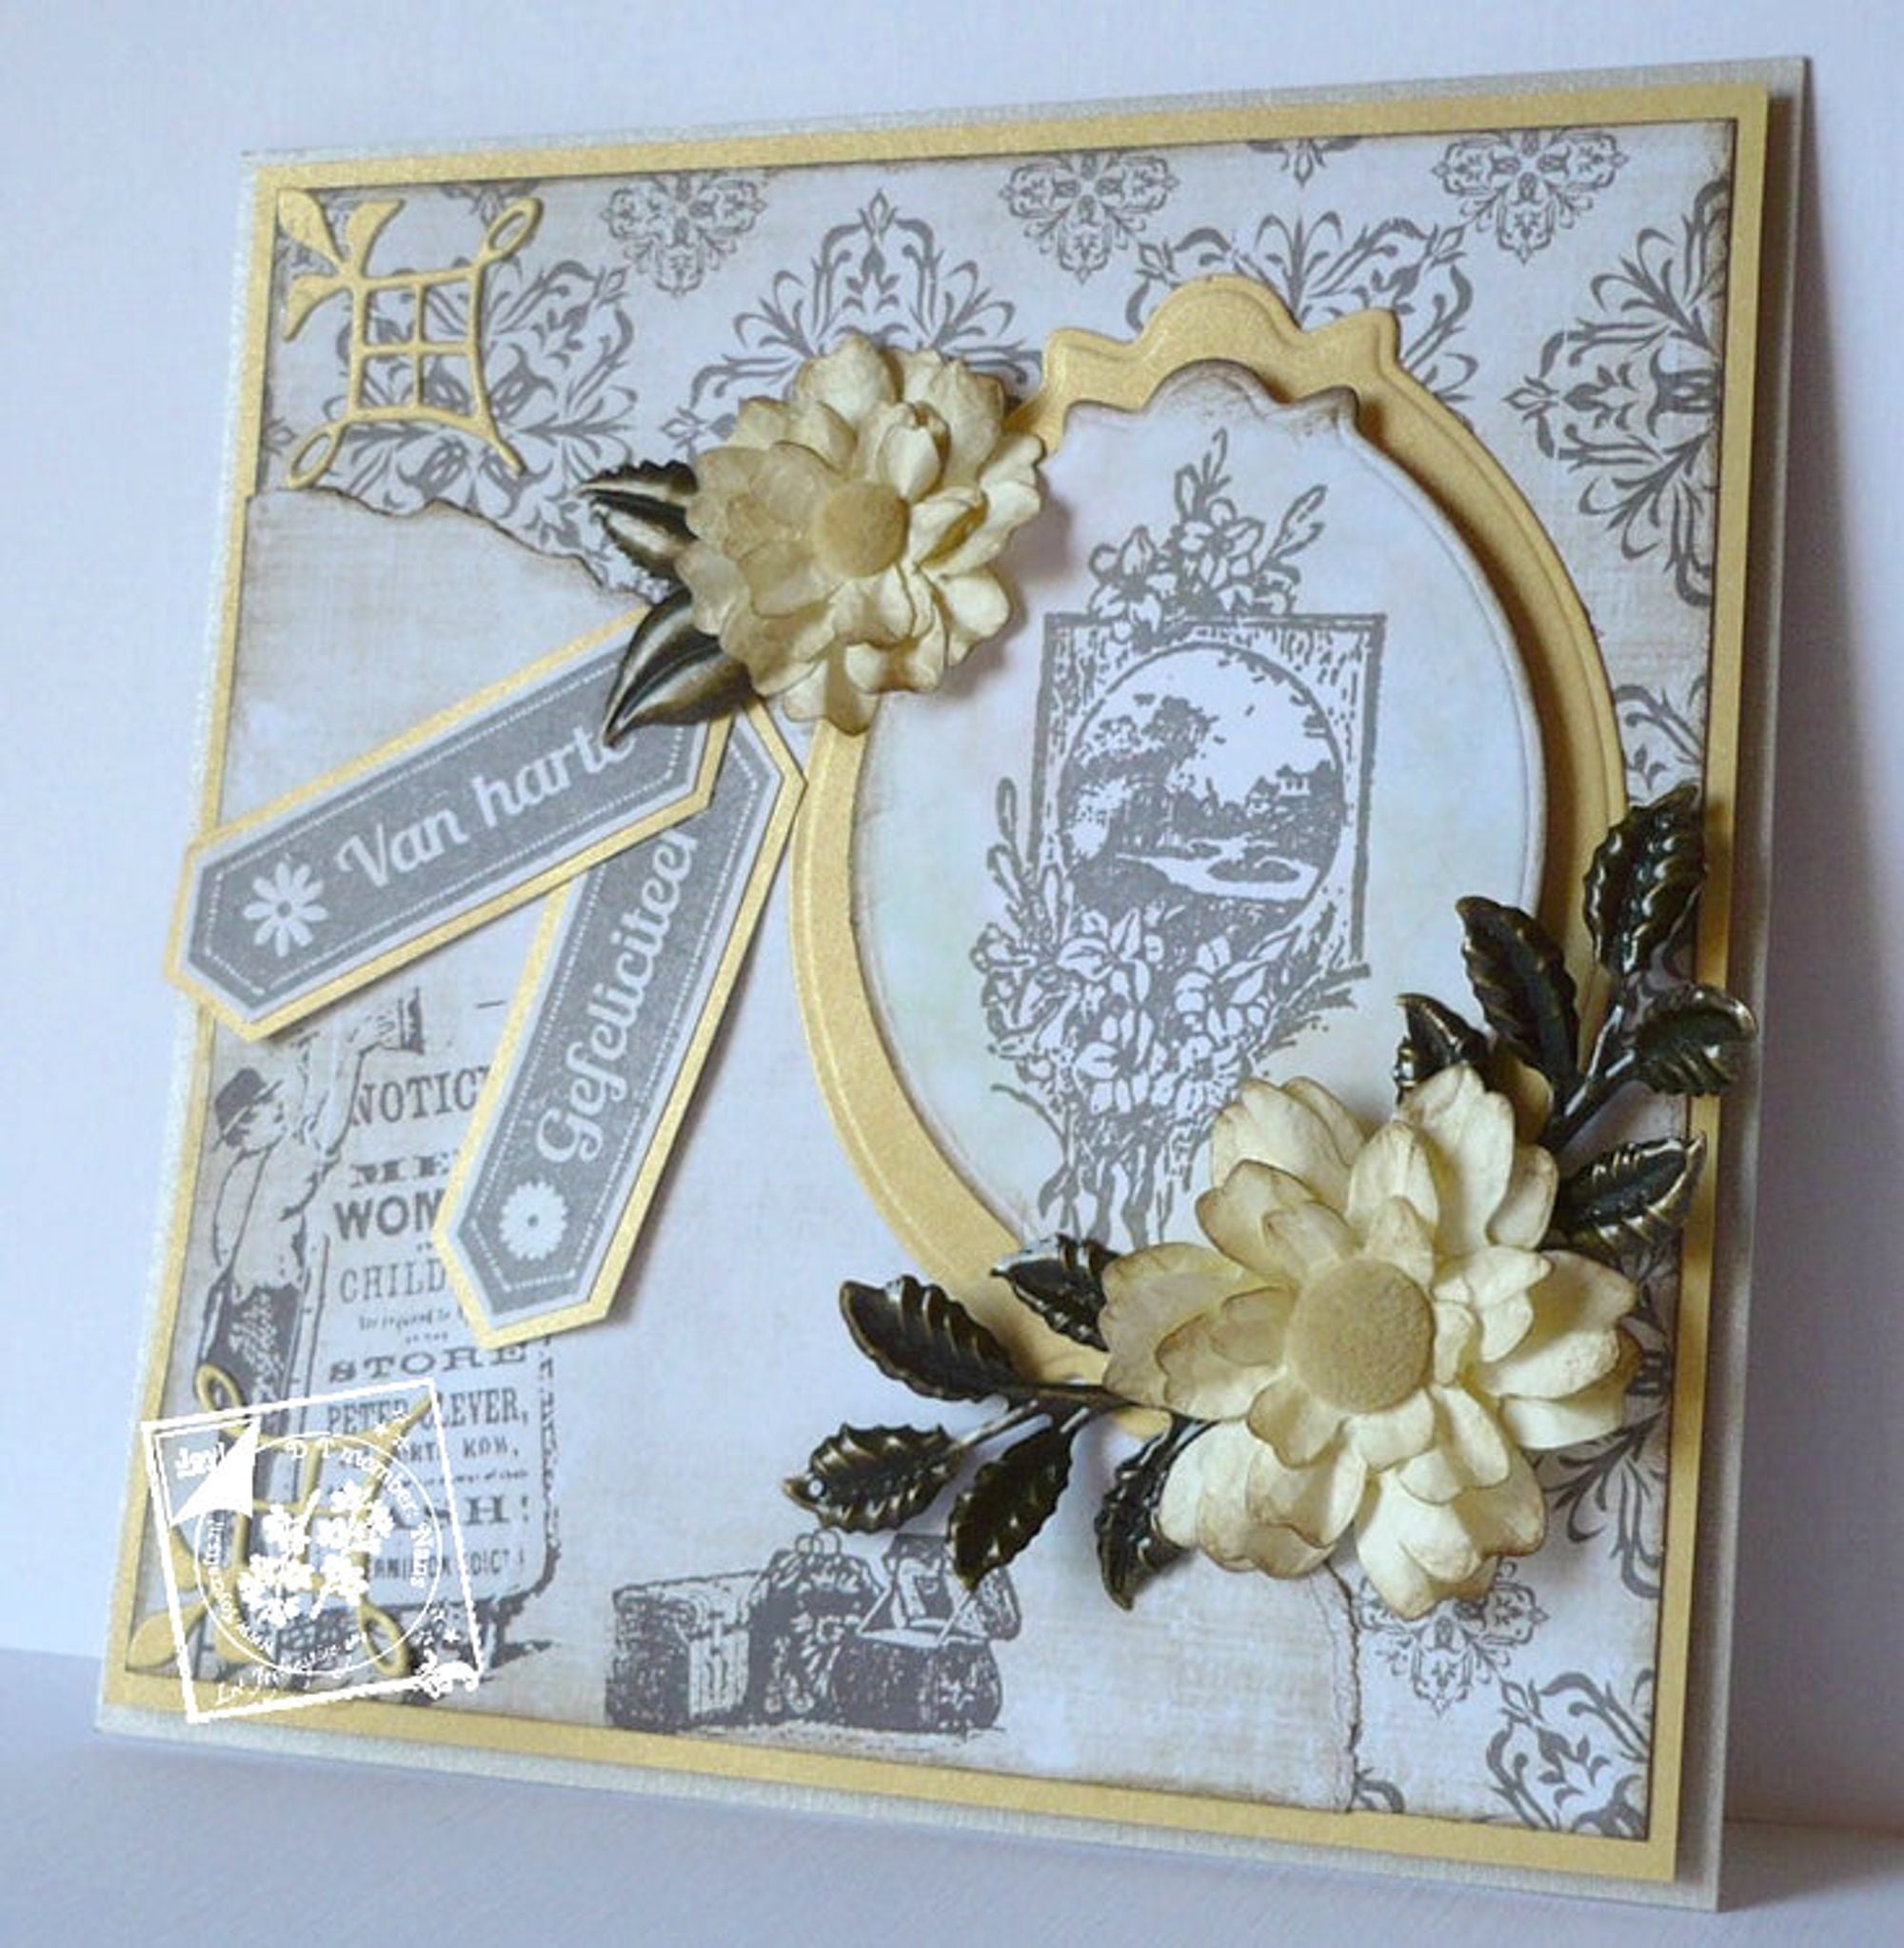 Clear stamp-Flowers with Picture Frame